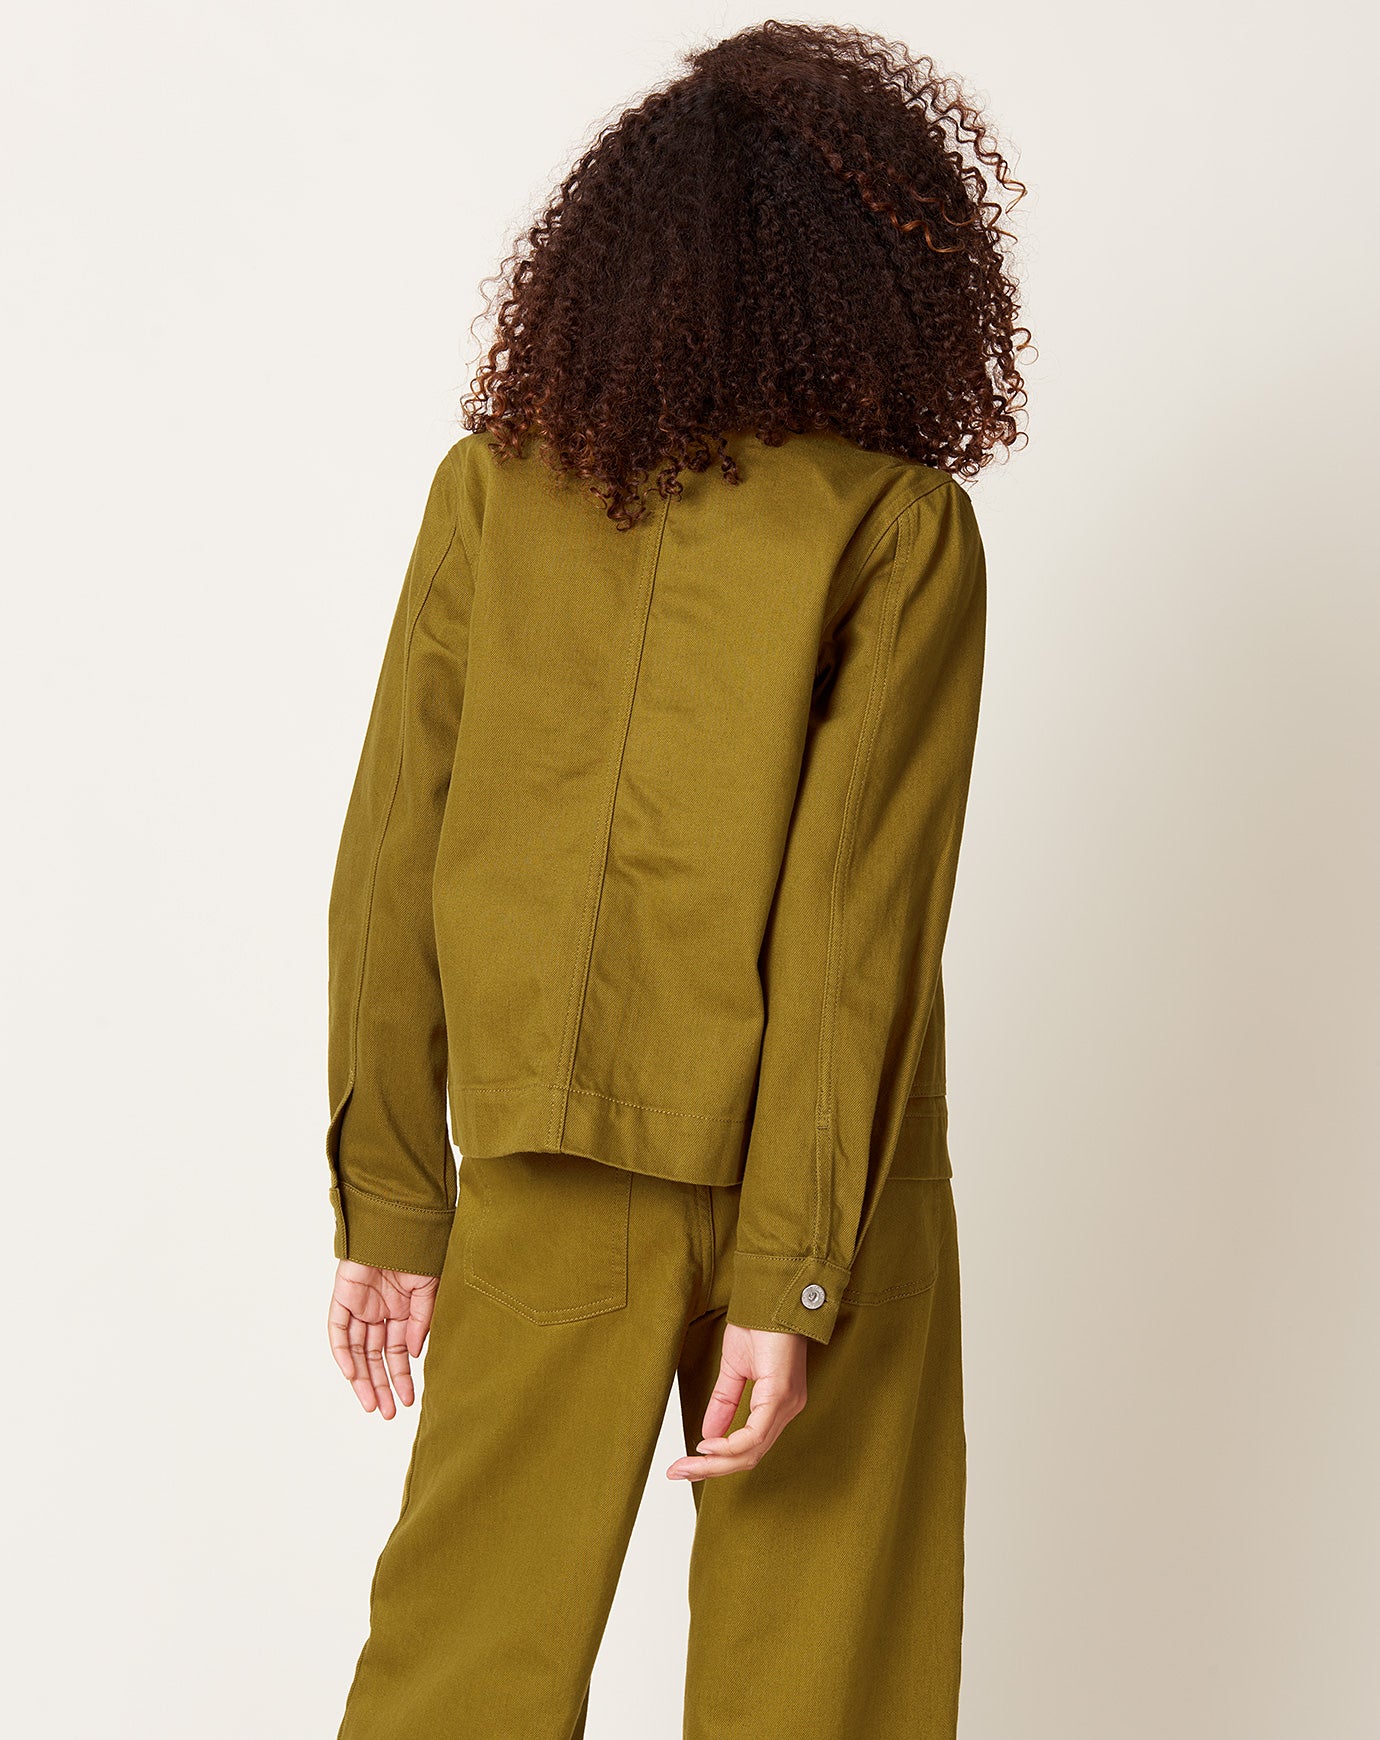 Kowtow Story Jacket in Chartreuse